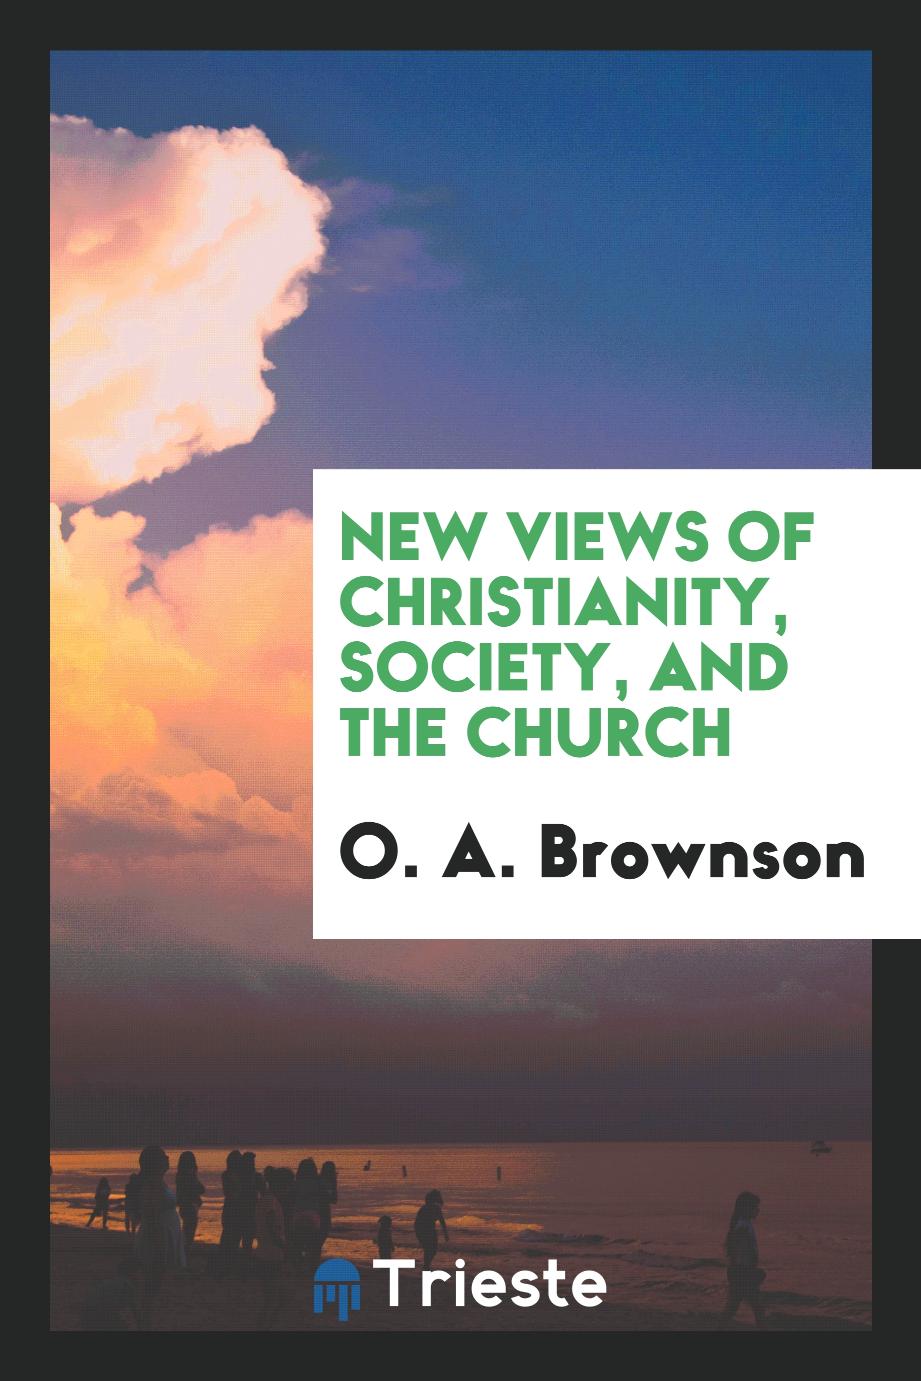 New Views of Christianity, Society, and the Church